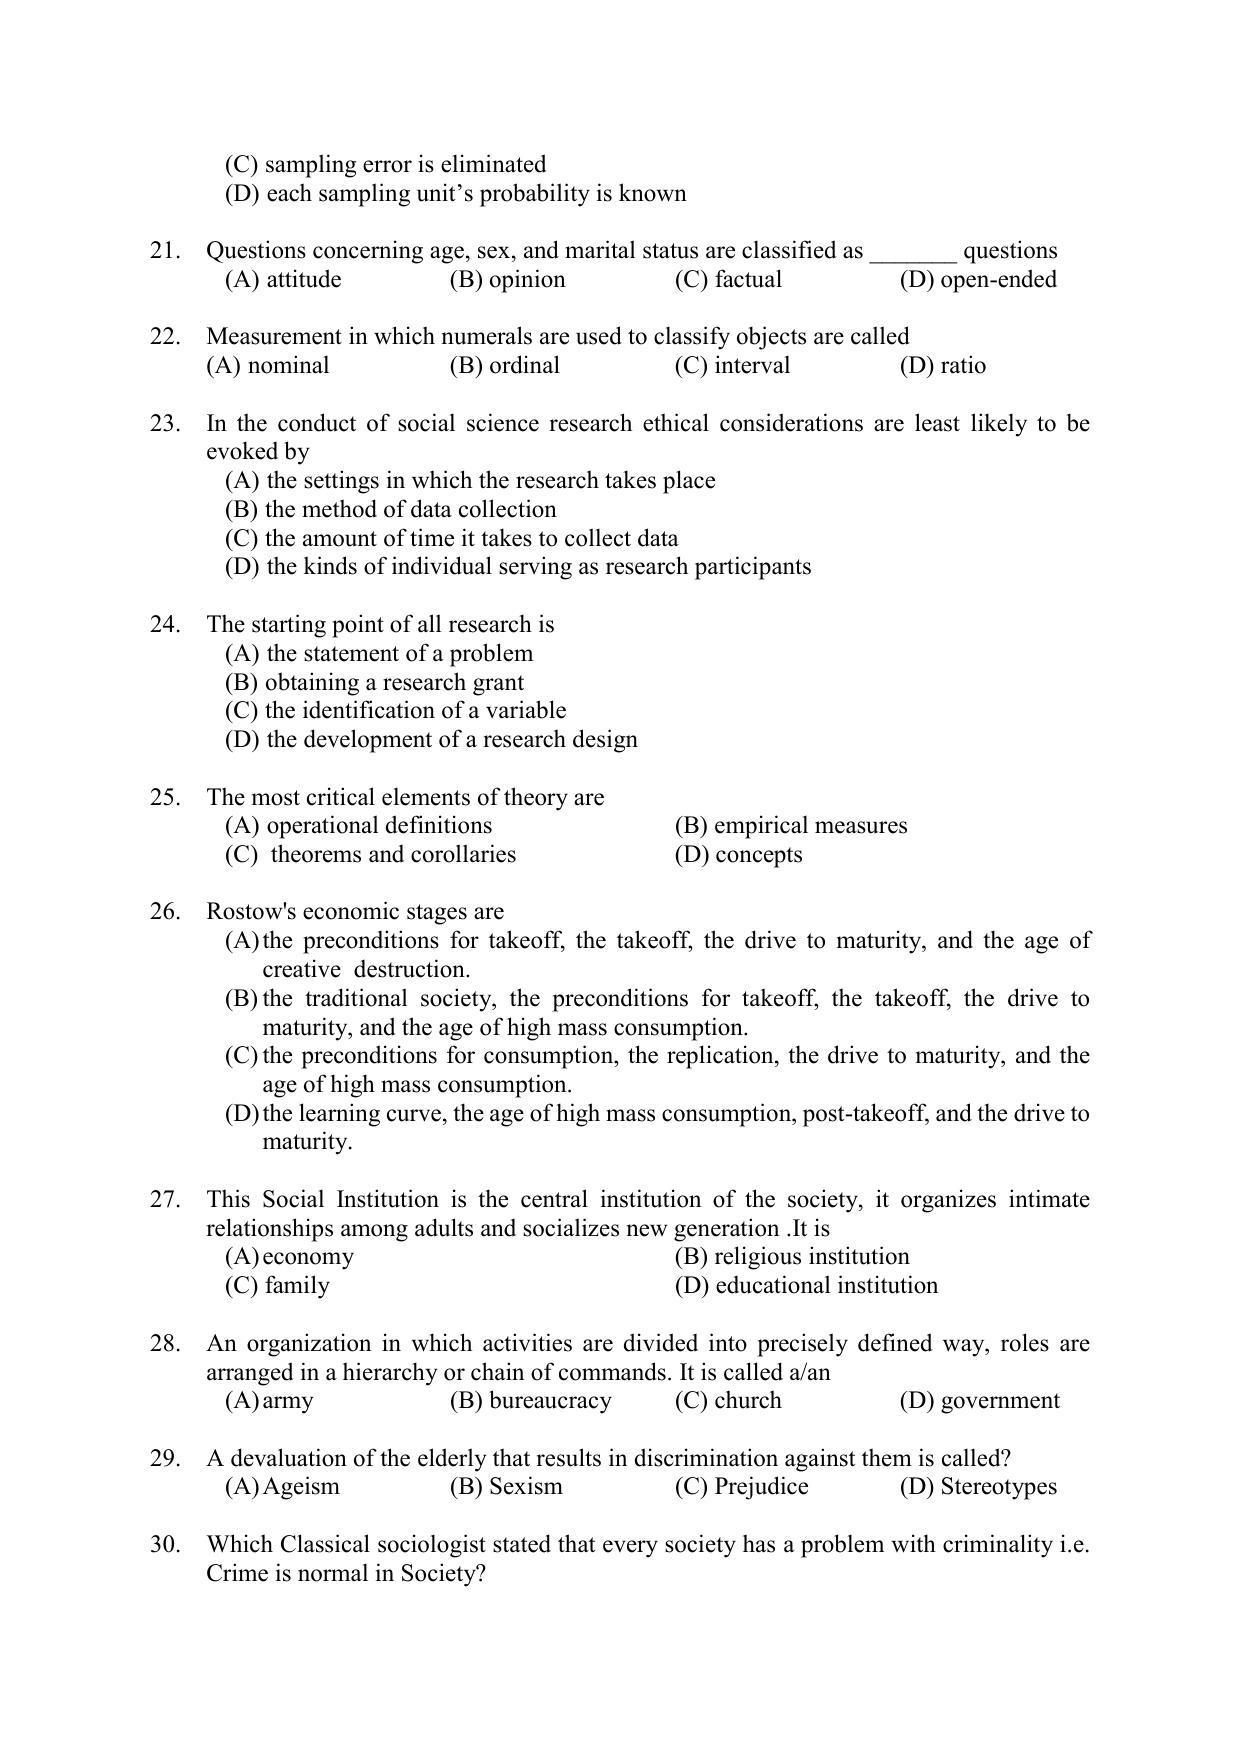 PU MPET Ancient Indian History & Archeology 2022 Question Papers - Page 72